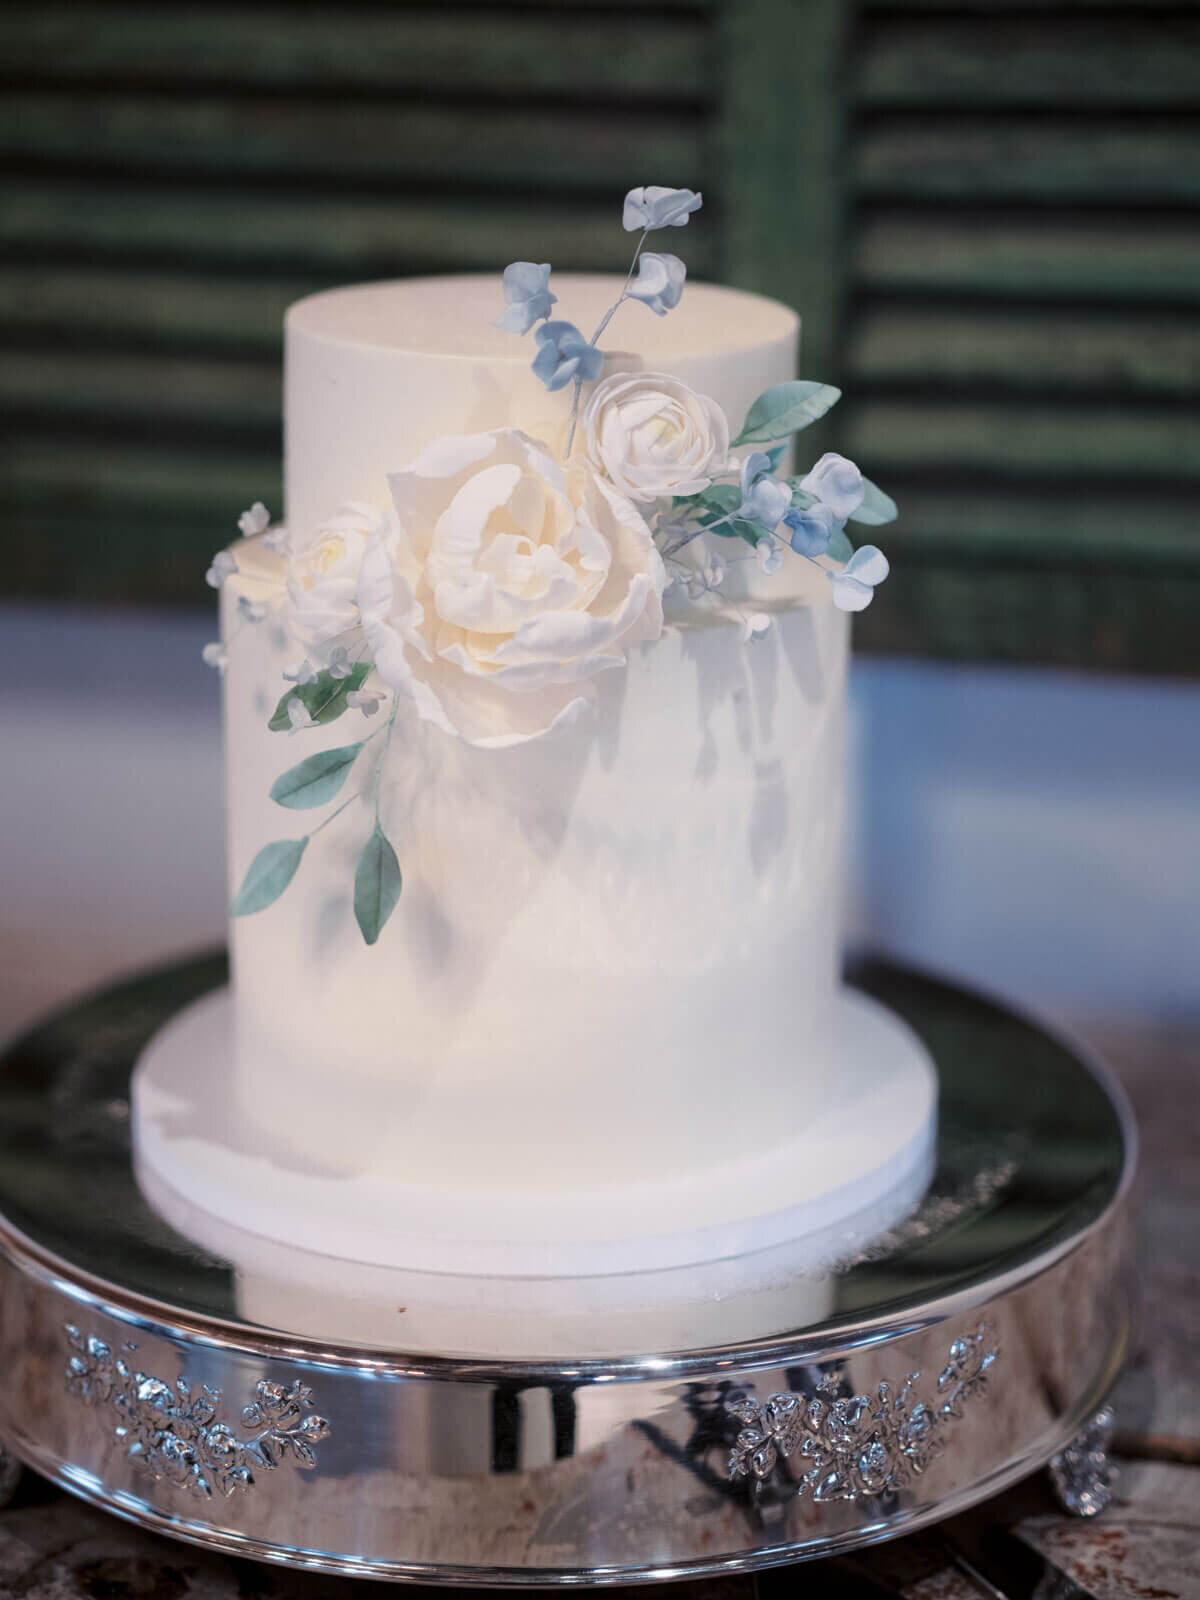 A simple white wedding cake with a big white flower and green leaves as an accent at Lion Rock Farm, CT. Image by Jenny Fu Studio